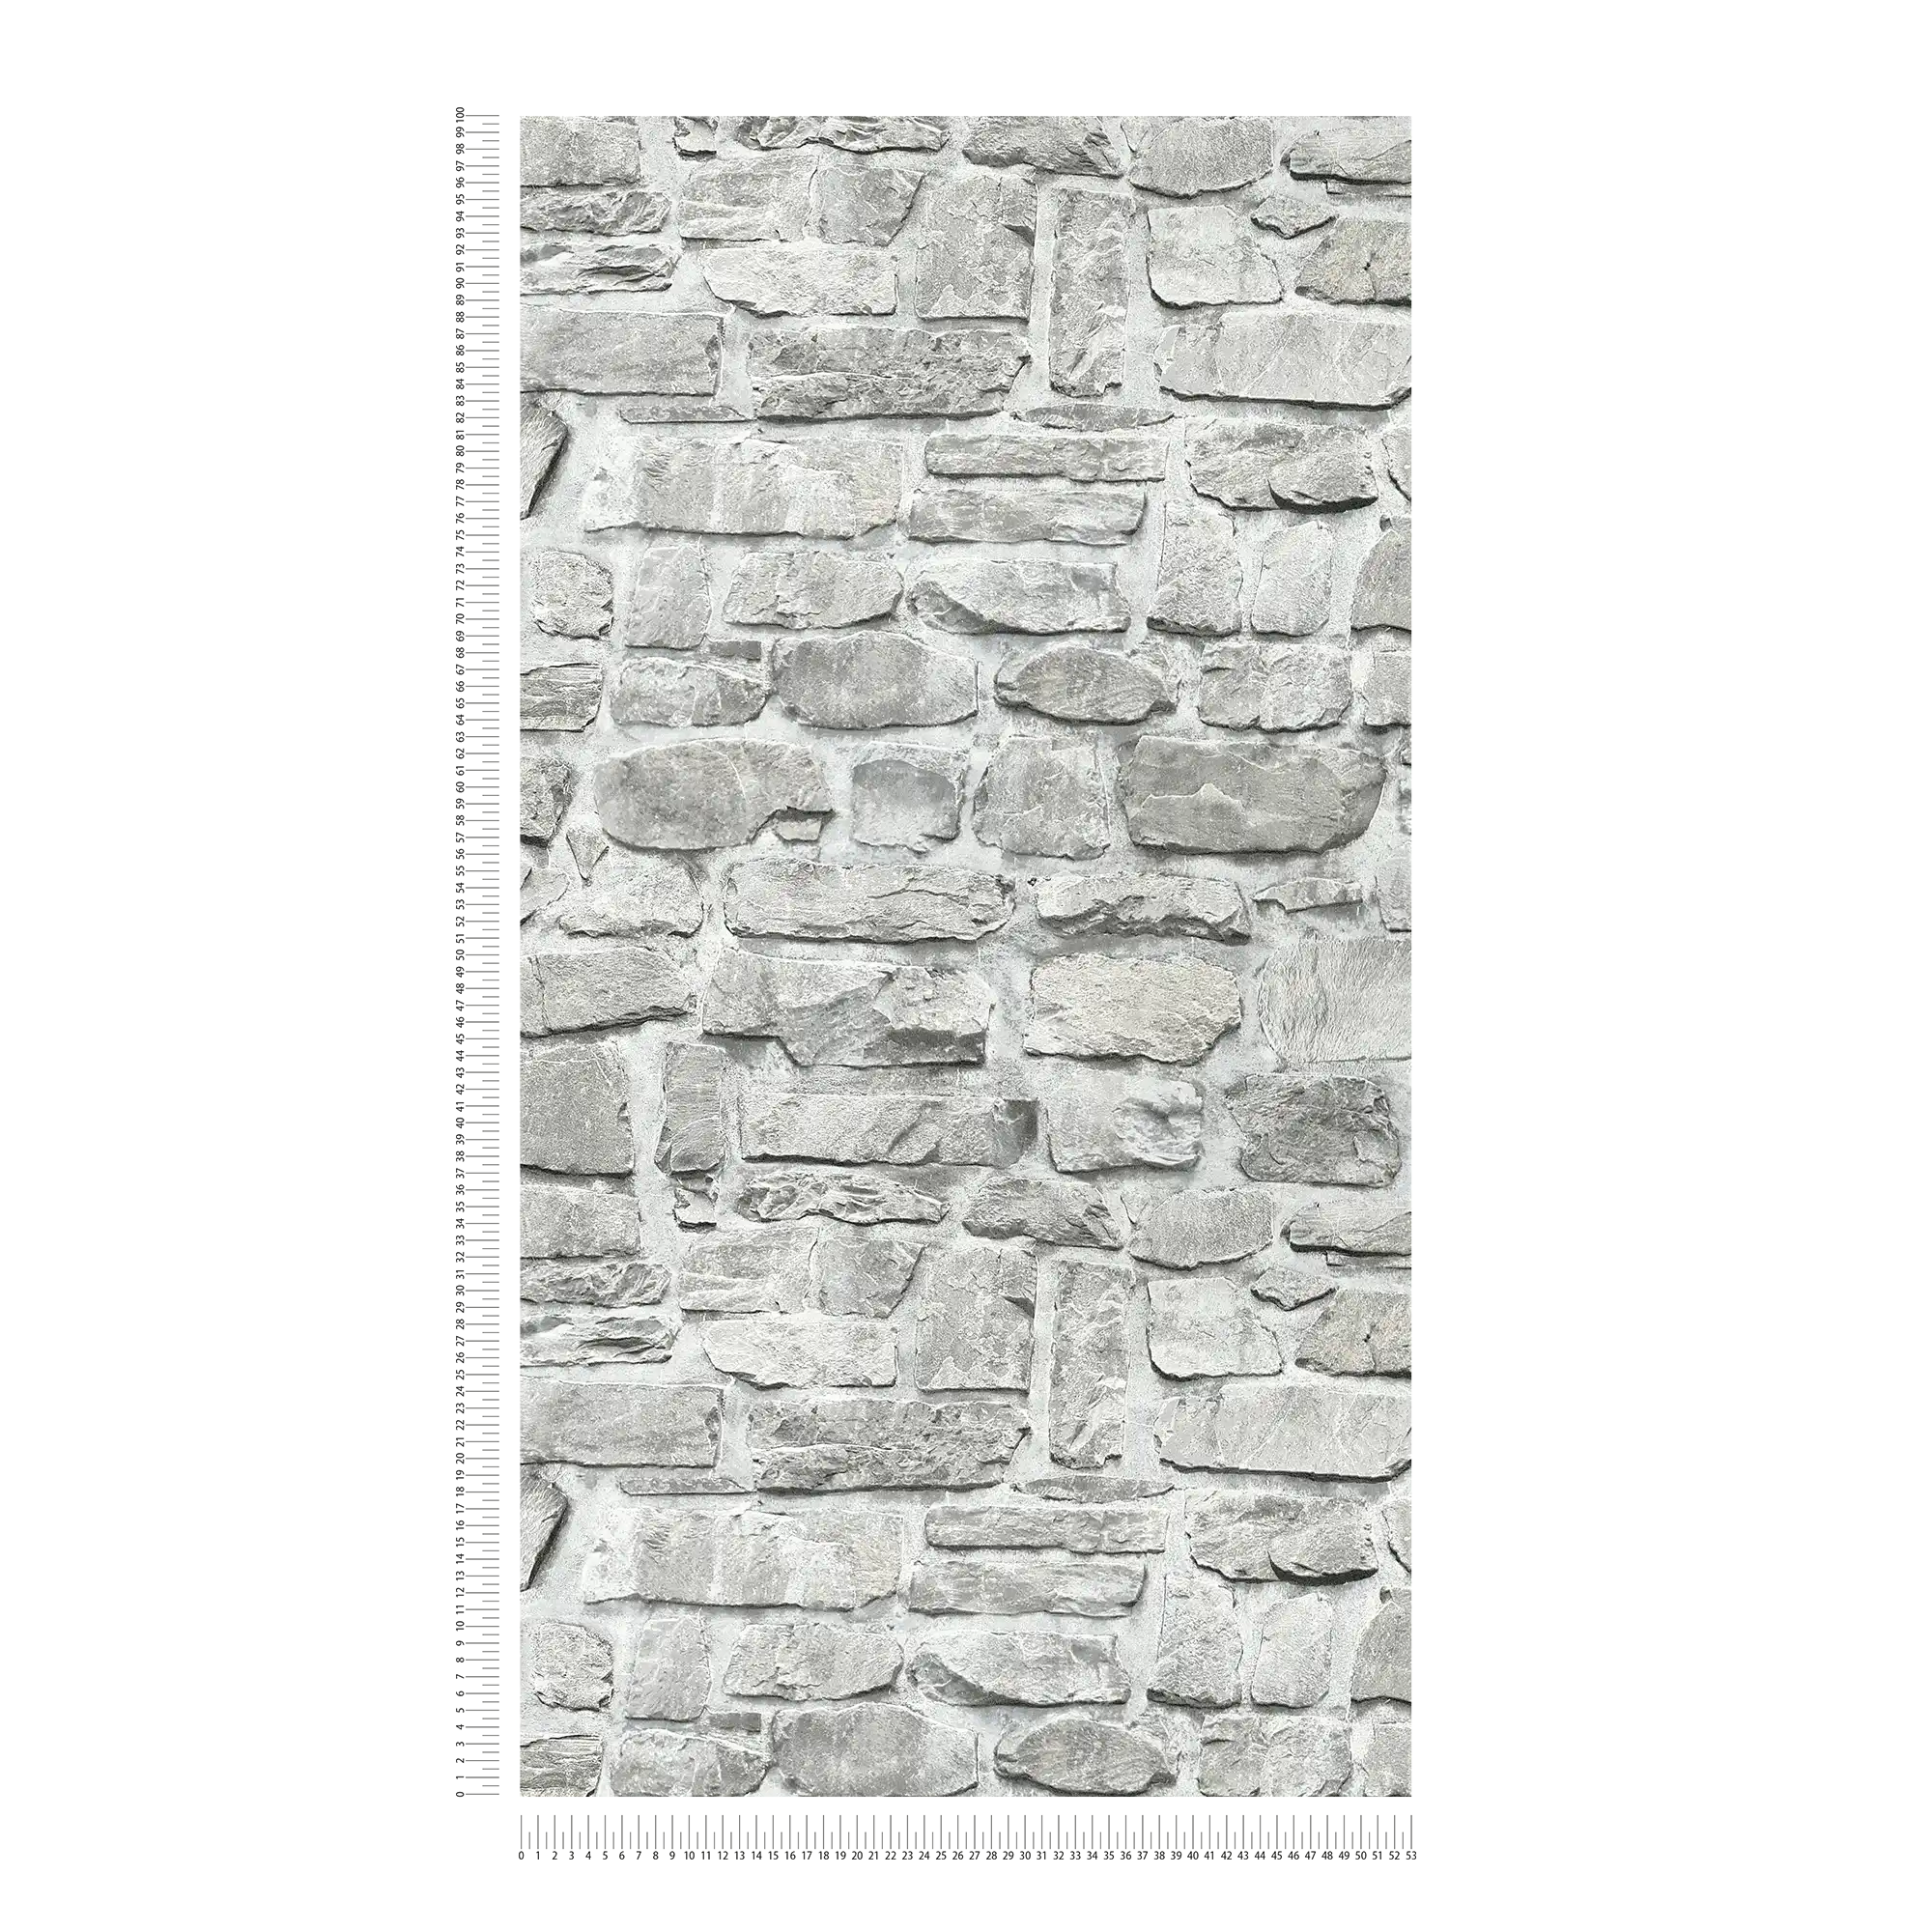             Stone non-woven wallpaper with natural stone pattern - grey, beige
        